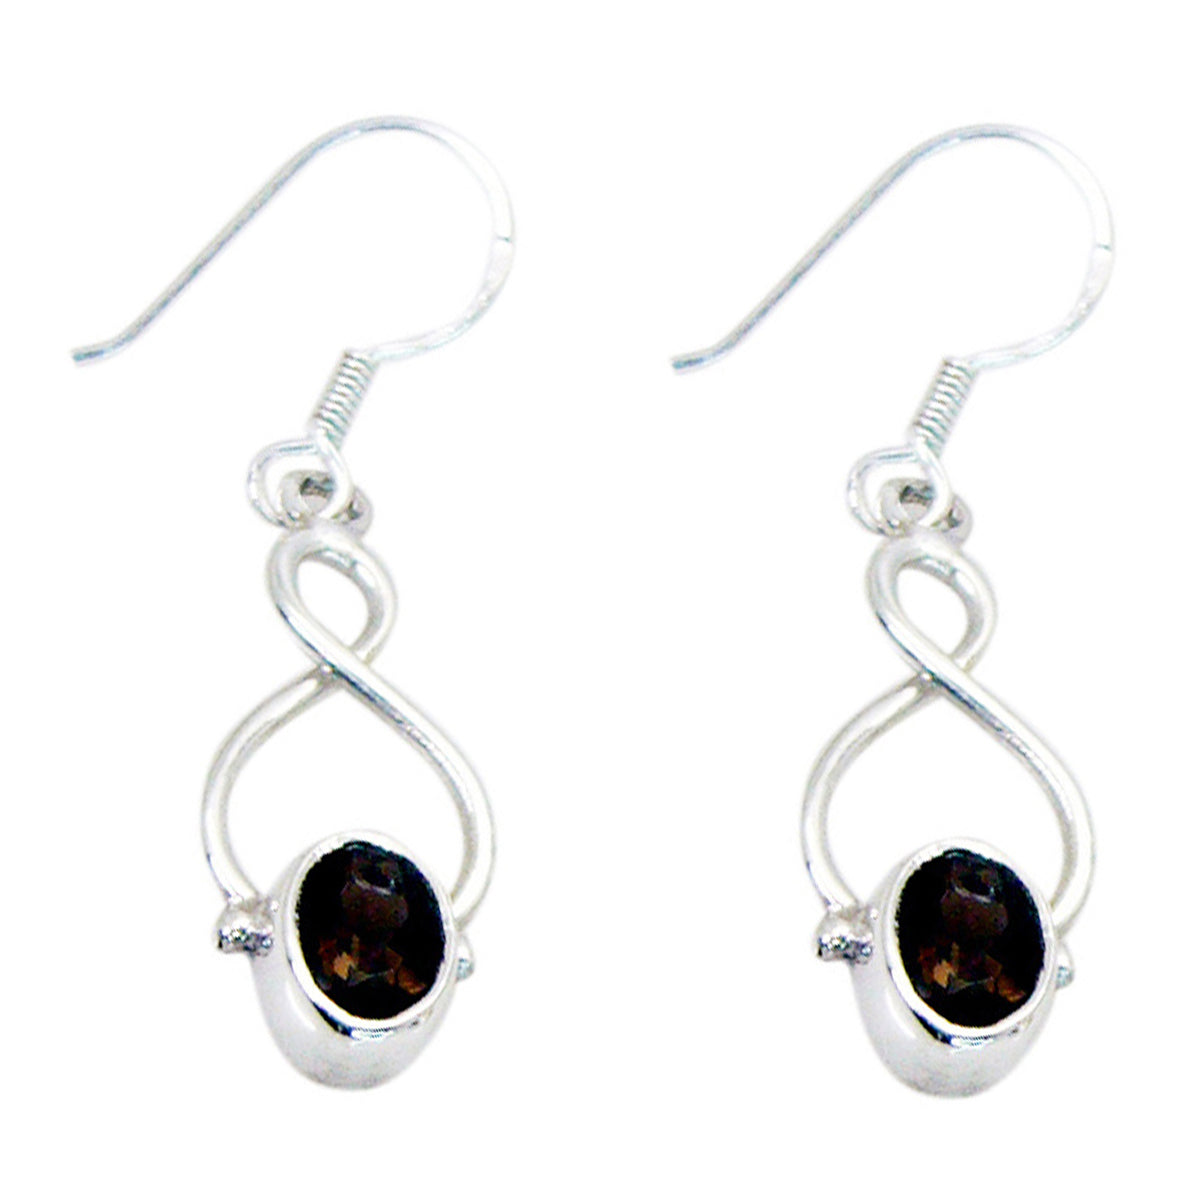 Riyo Real Gemstones oval Faceted Brown Smokey Quartz Silver Earring gift for friends